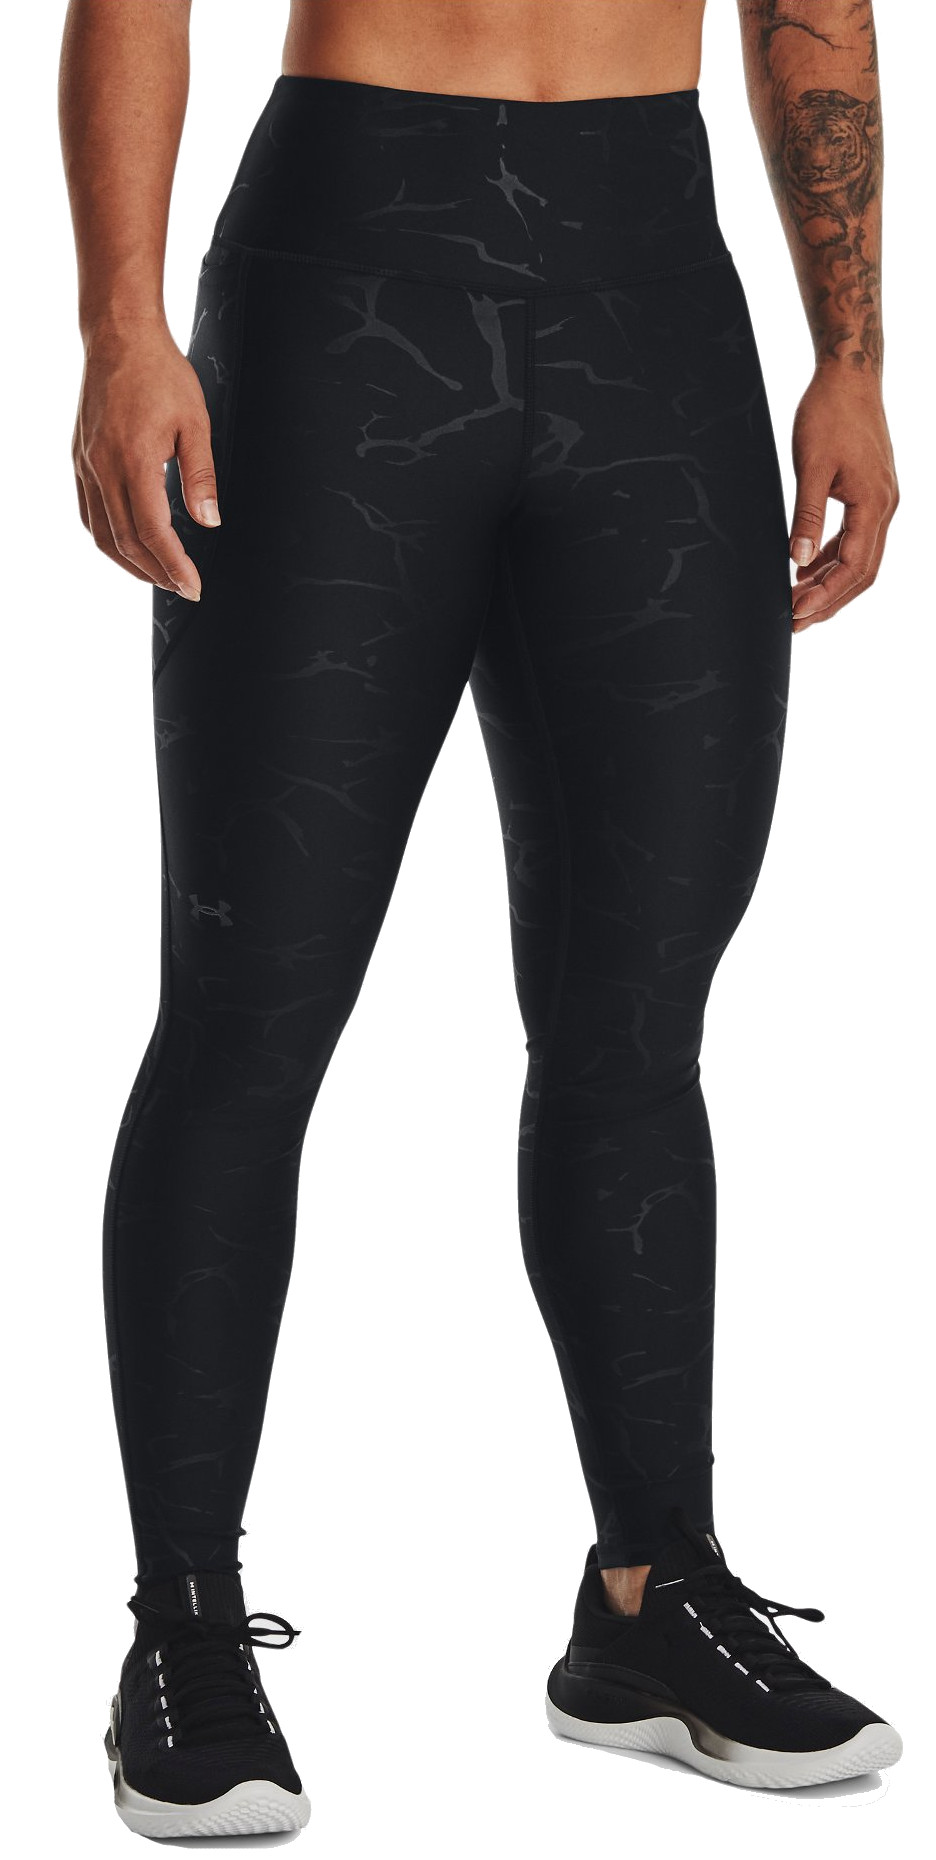 https://i1.t4s.cz/products/1377108-001/under-armour-under-armour-armour-emboss-legging-591482-1377108-001.jpg